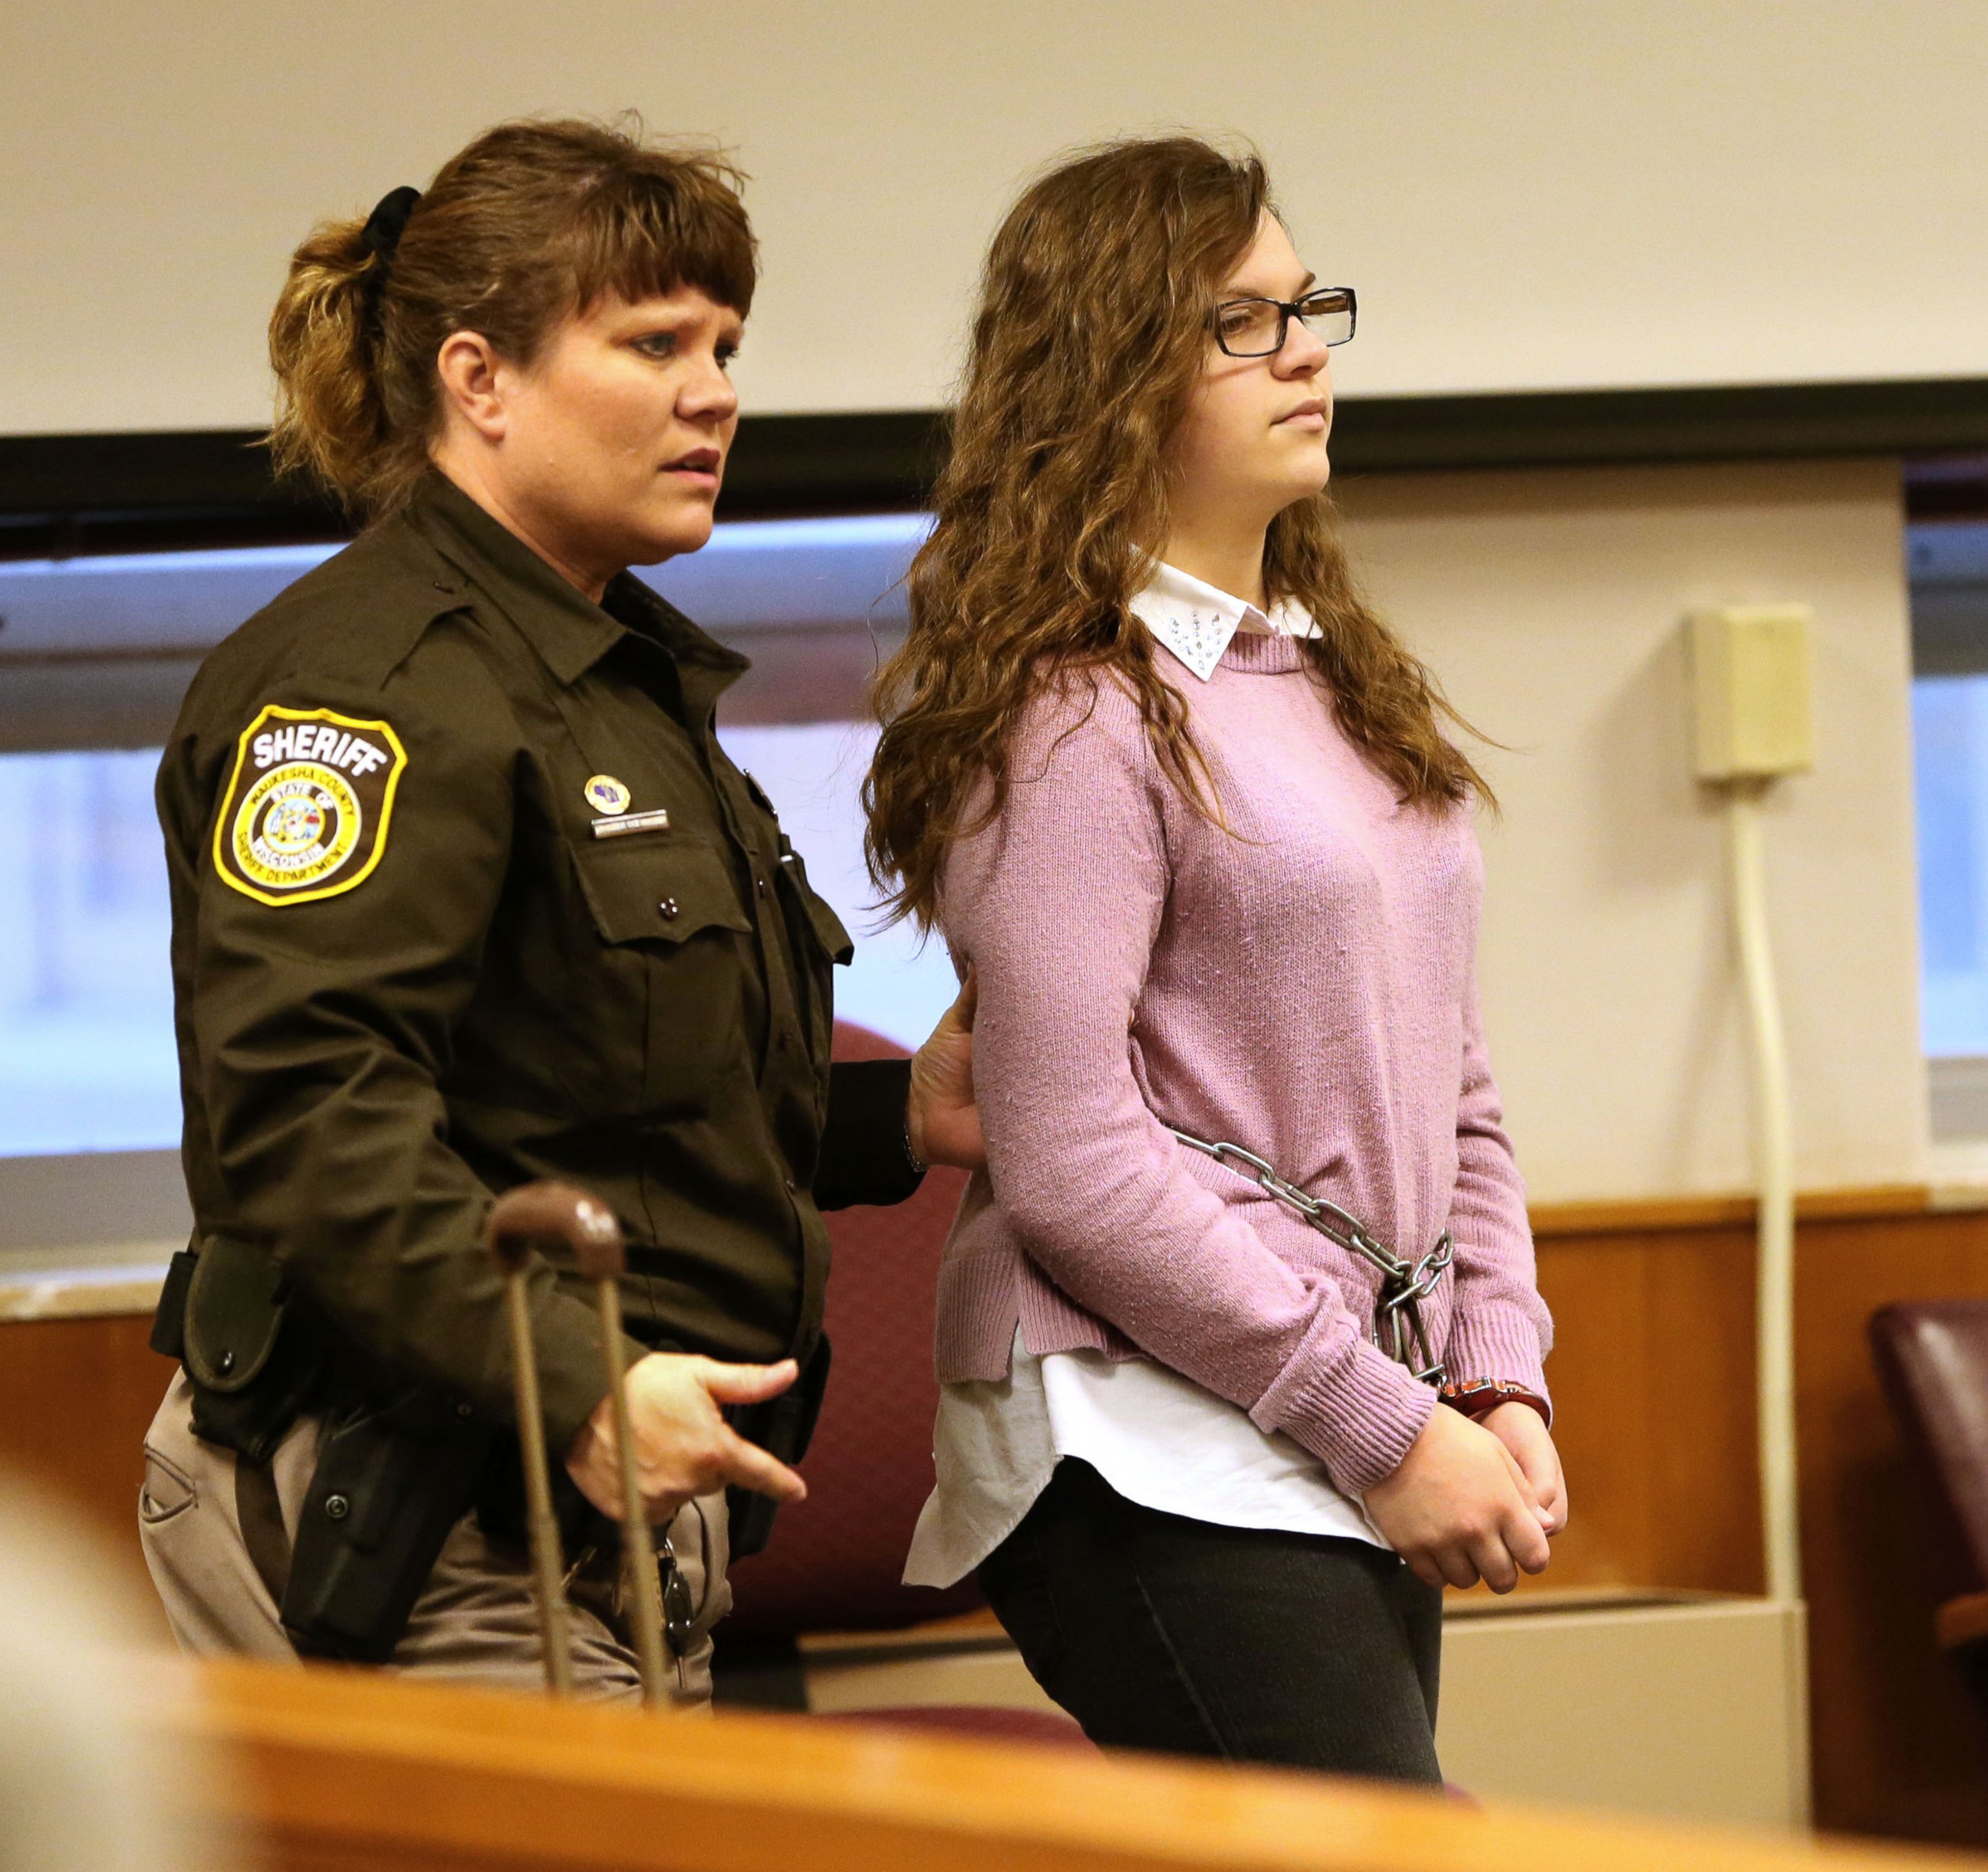 PHOTO: Anissa Weier, accused of being involved in the stabbing of another girl related to the "Slenderman" online story, is led into the courtroom on Dec. 22, 2016, in Waukesha, Wisconsin. 